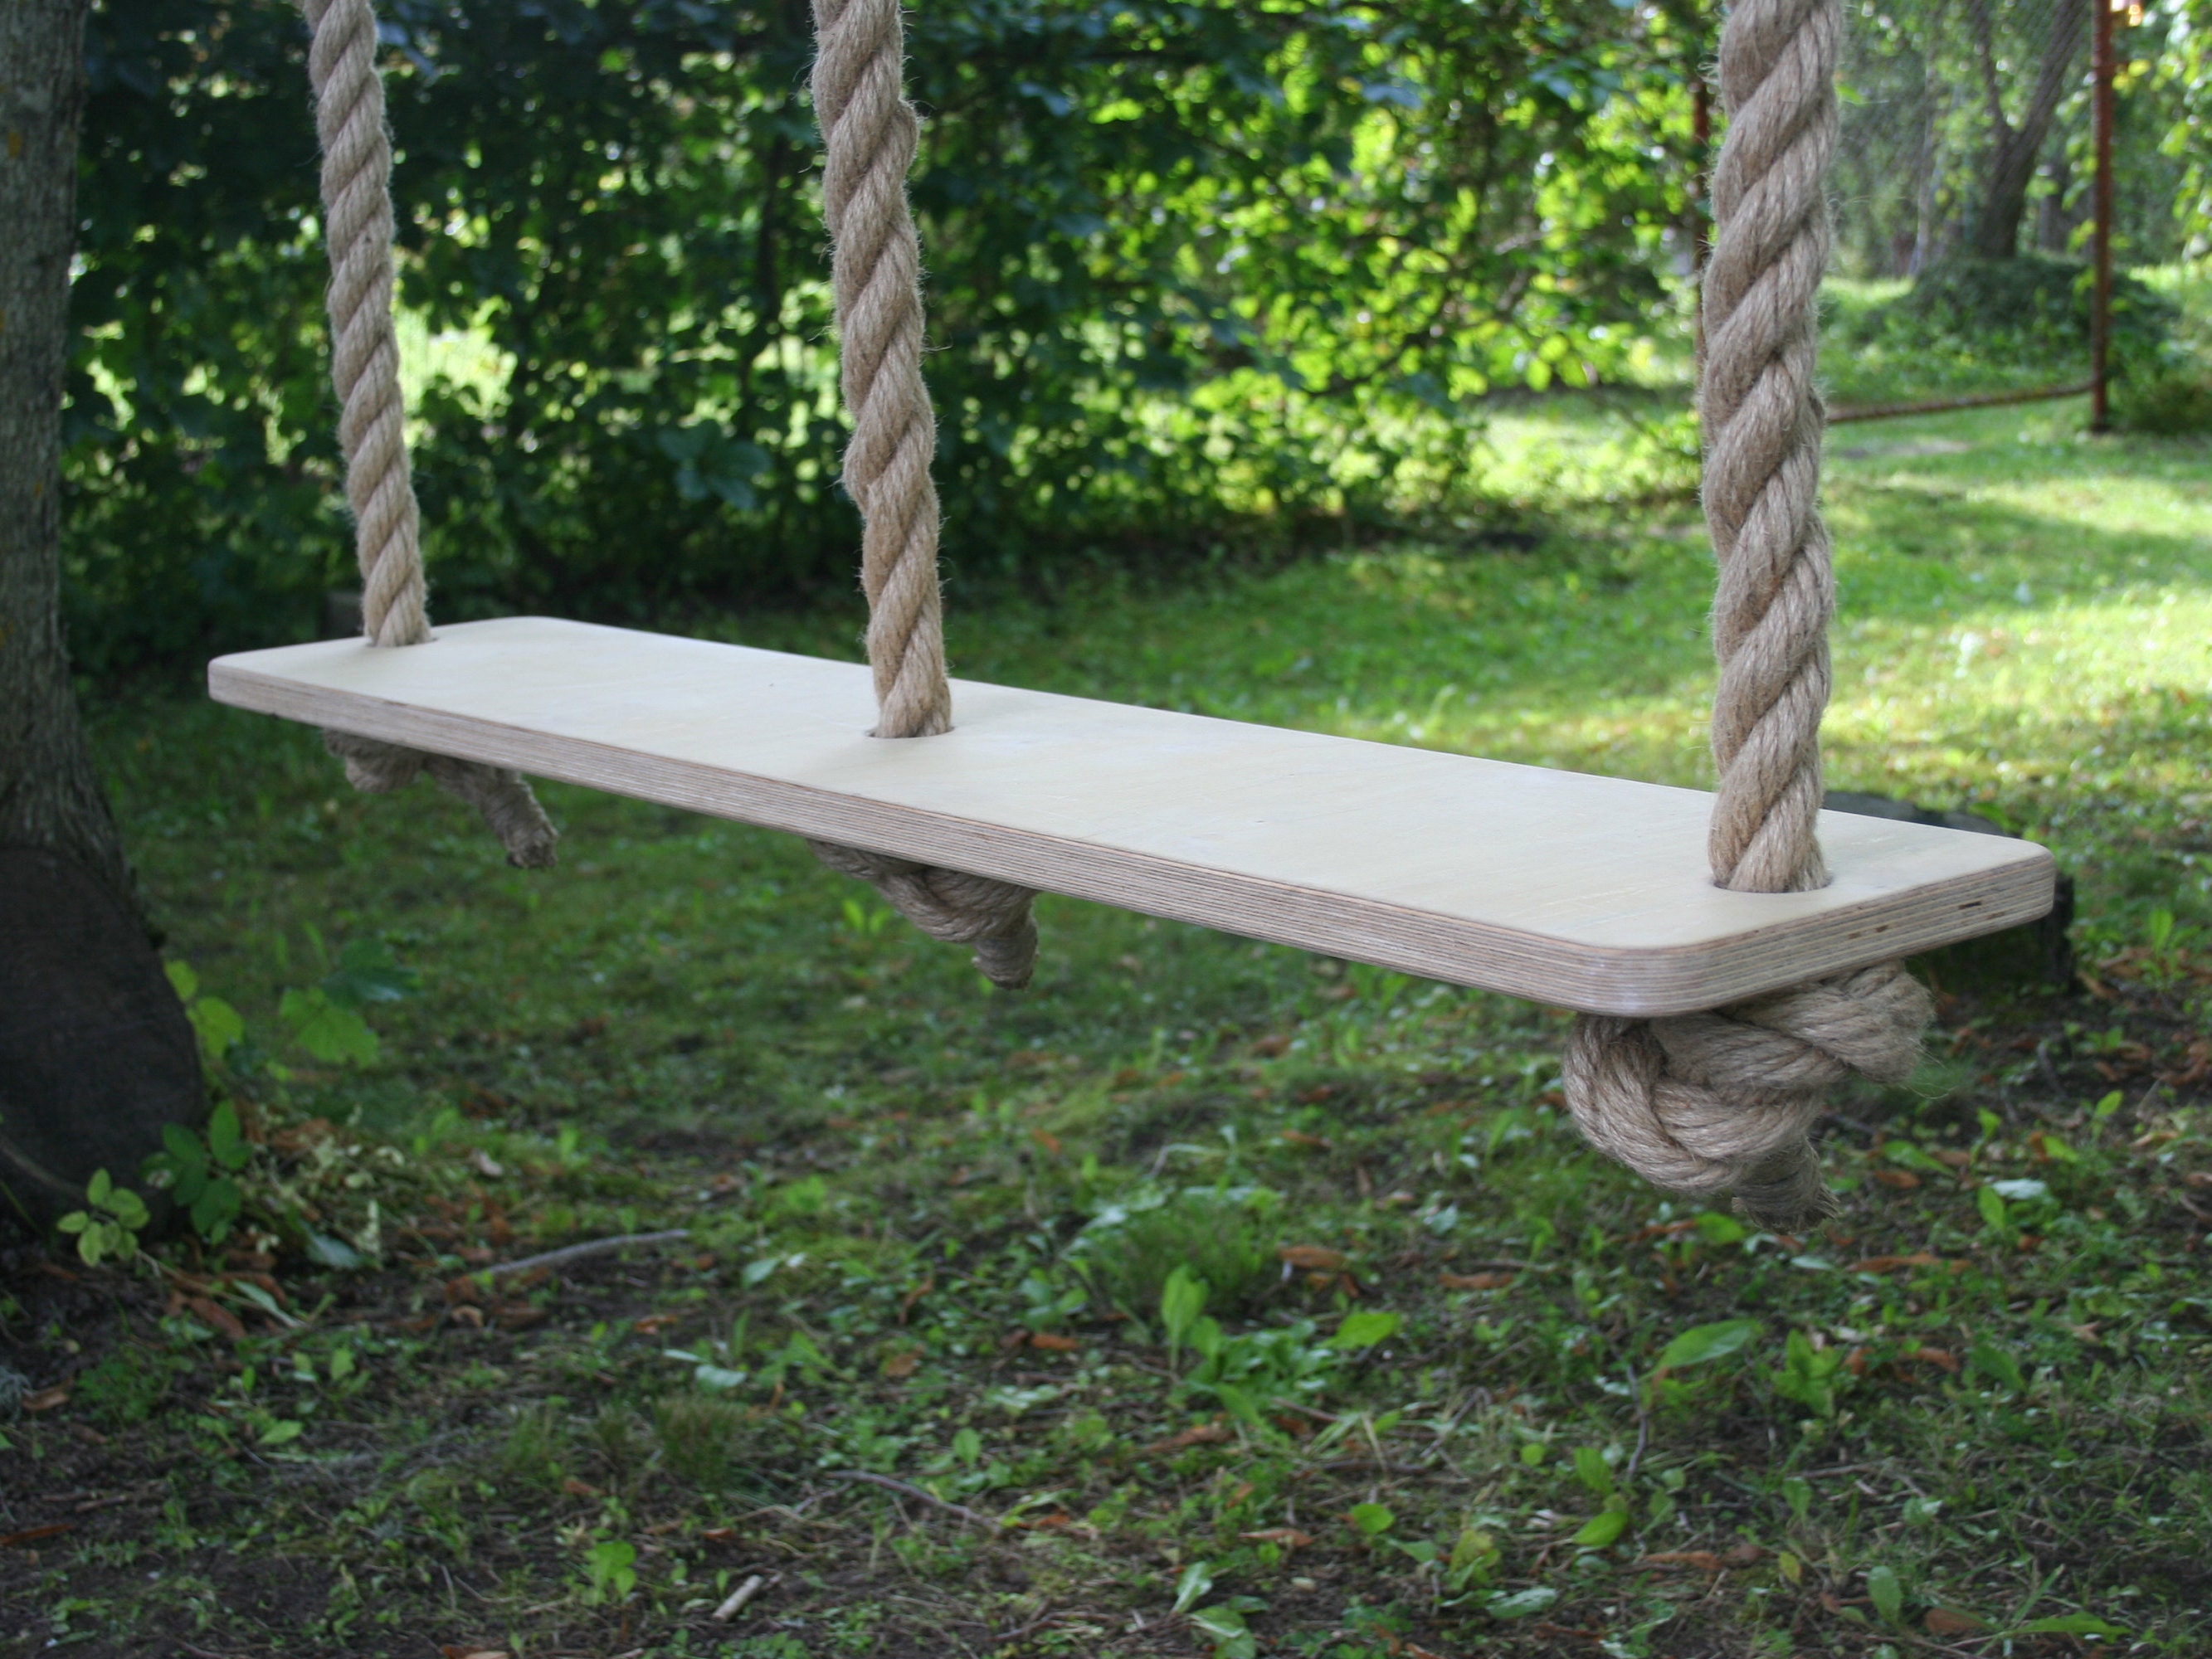 Rustic Swing, 3.3 Feet 1m Wide, 6.6-66 Feet Long Rope, Plywood Swing for  Both Kids and Adults, Outdoor Tree Swing, Minimalist Design -  Israel